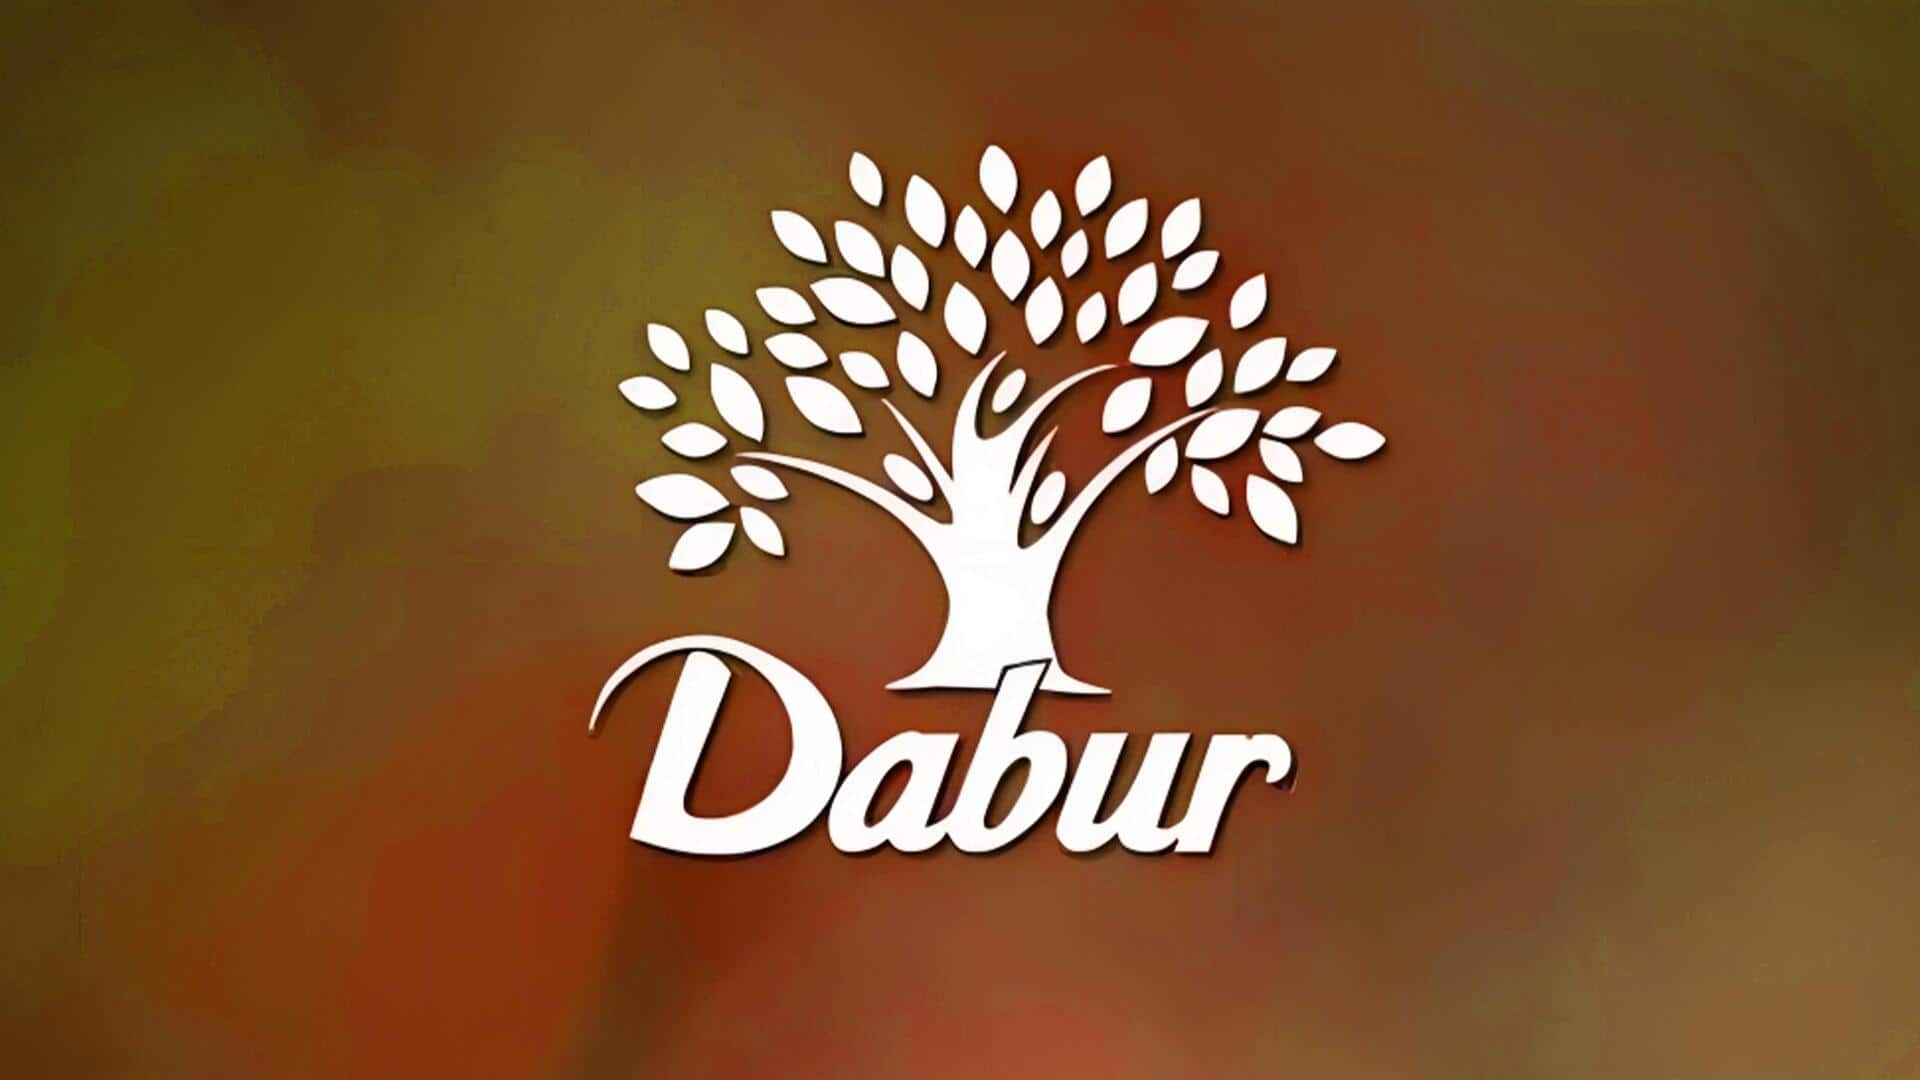 Dabur subsidiaries sued in US, Canada over alleged cancer-causing products